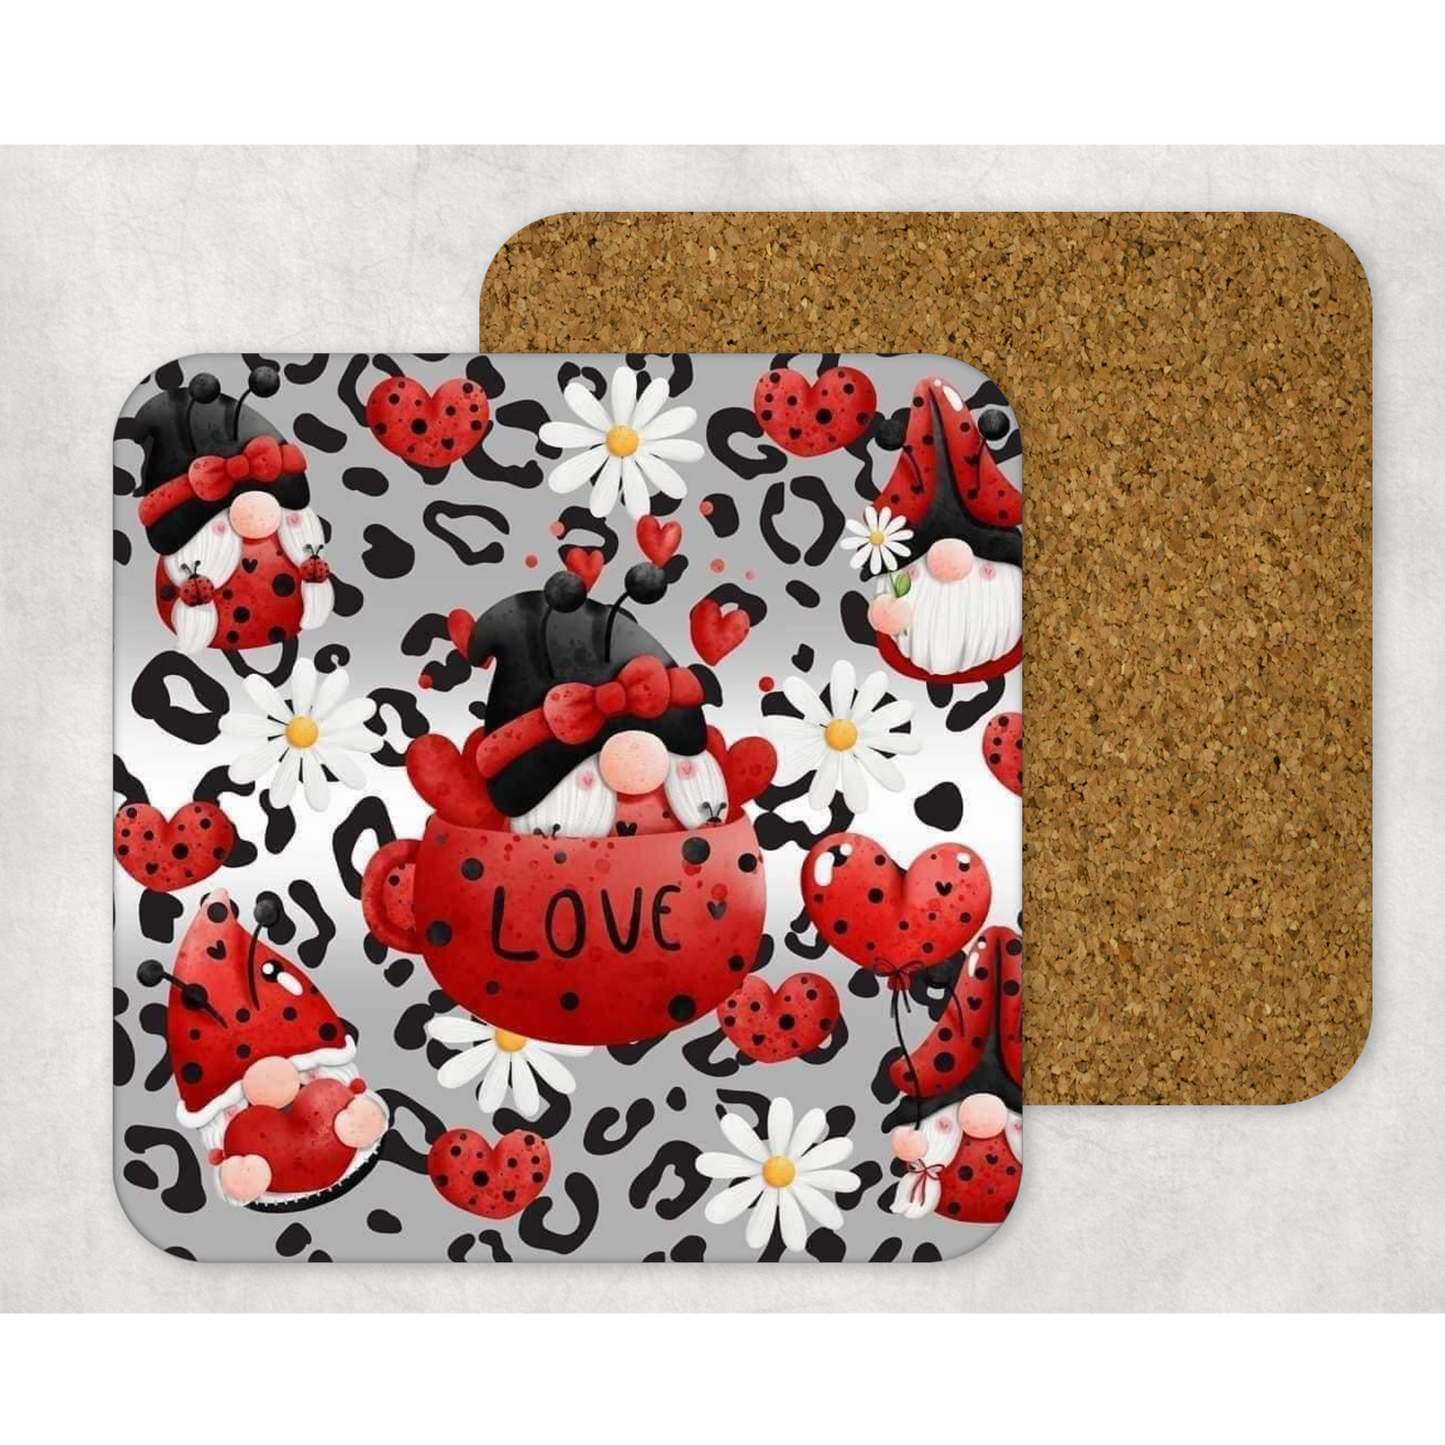 Beautifully Printed  Ladybug Gonk Wooden Coasters for Stylish Home Décor